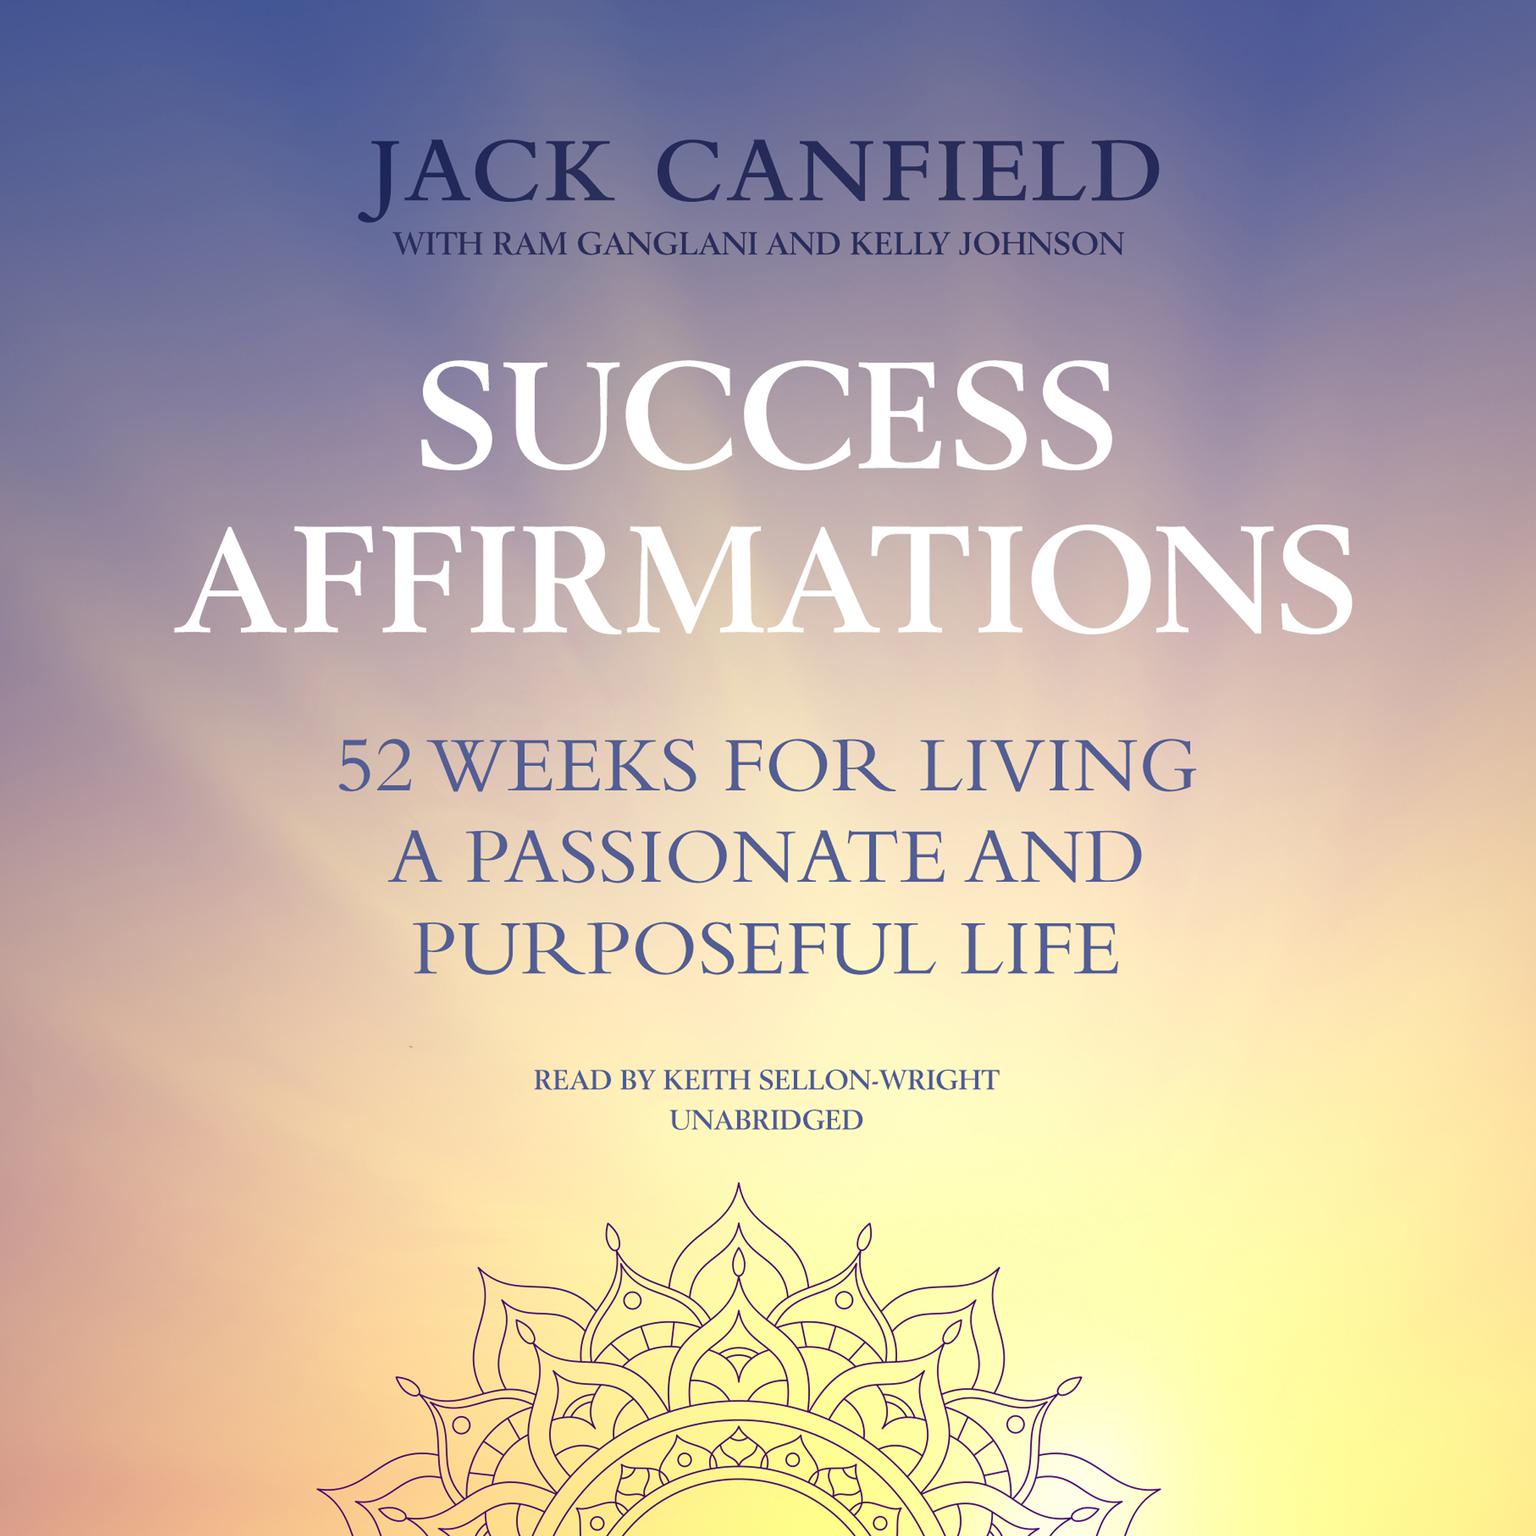 Success Affirmations: 52 Weeks for Living a Passionate and Purposeful Life Audiobook, by Jack Canfield